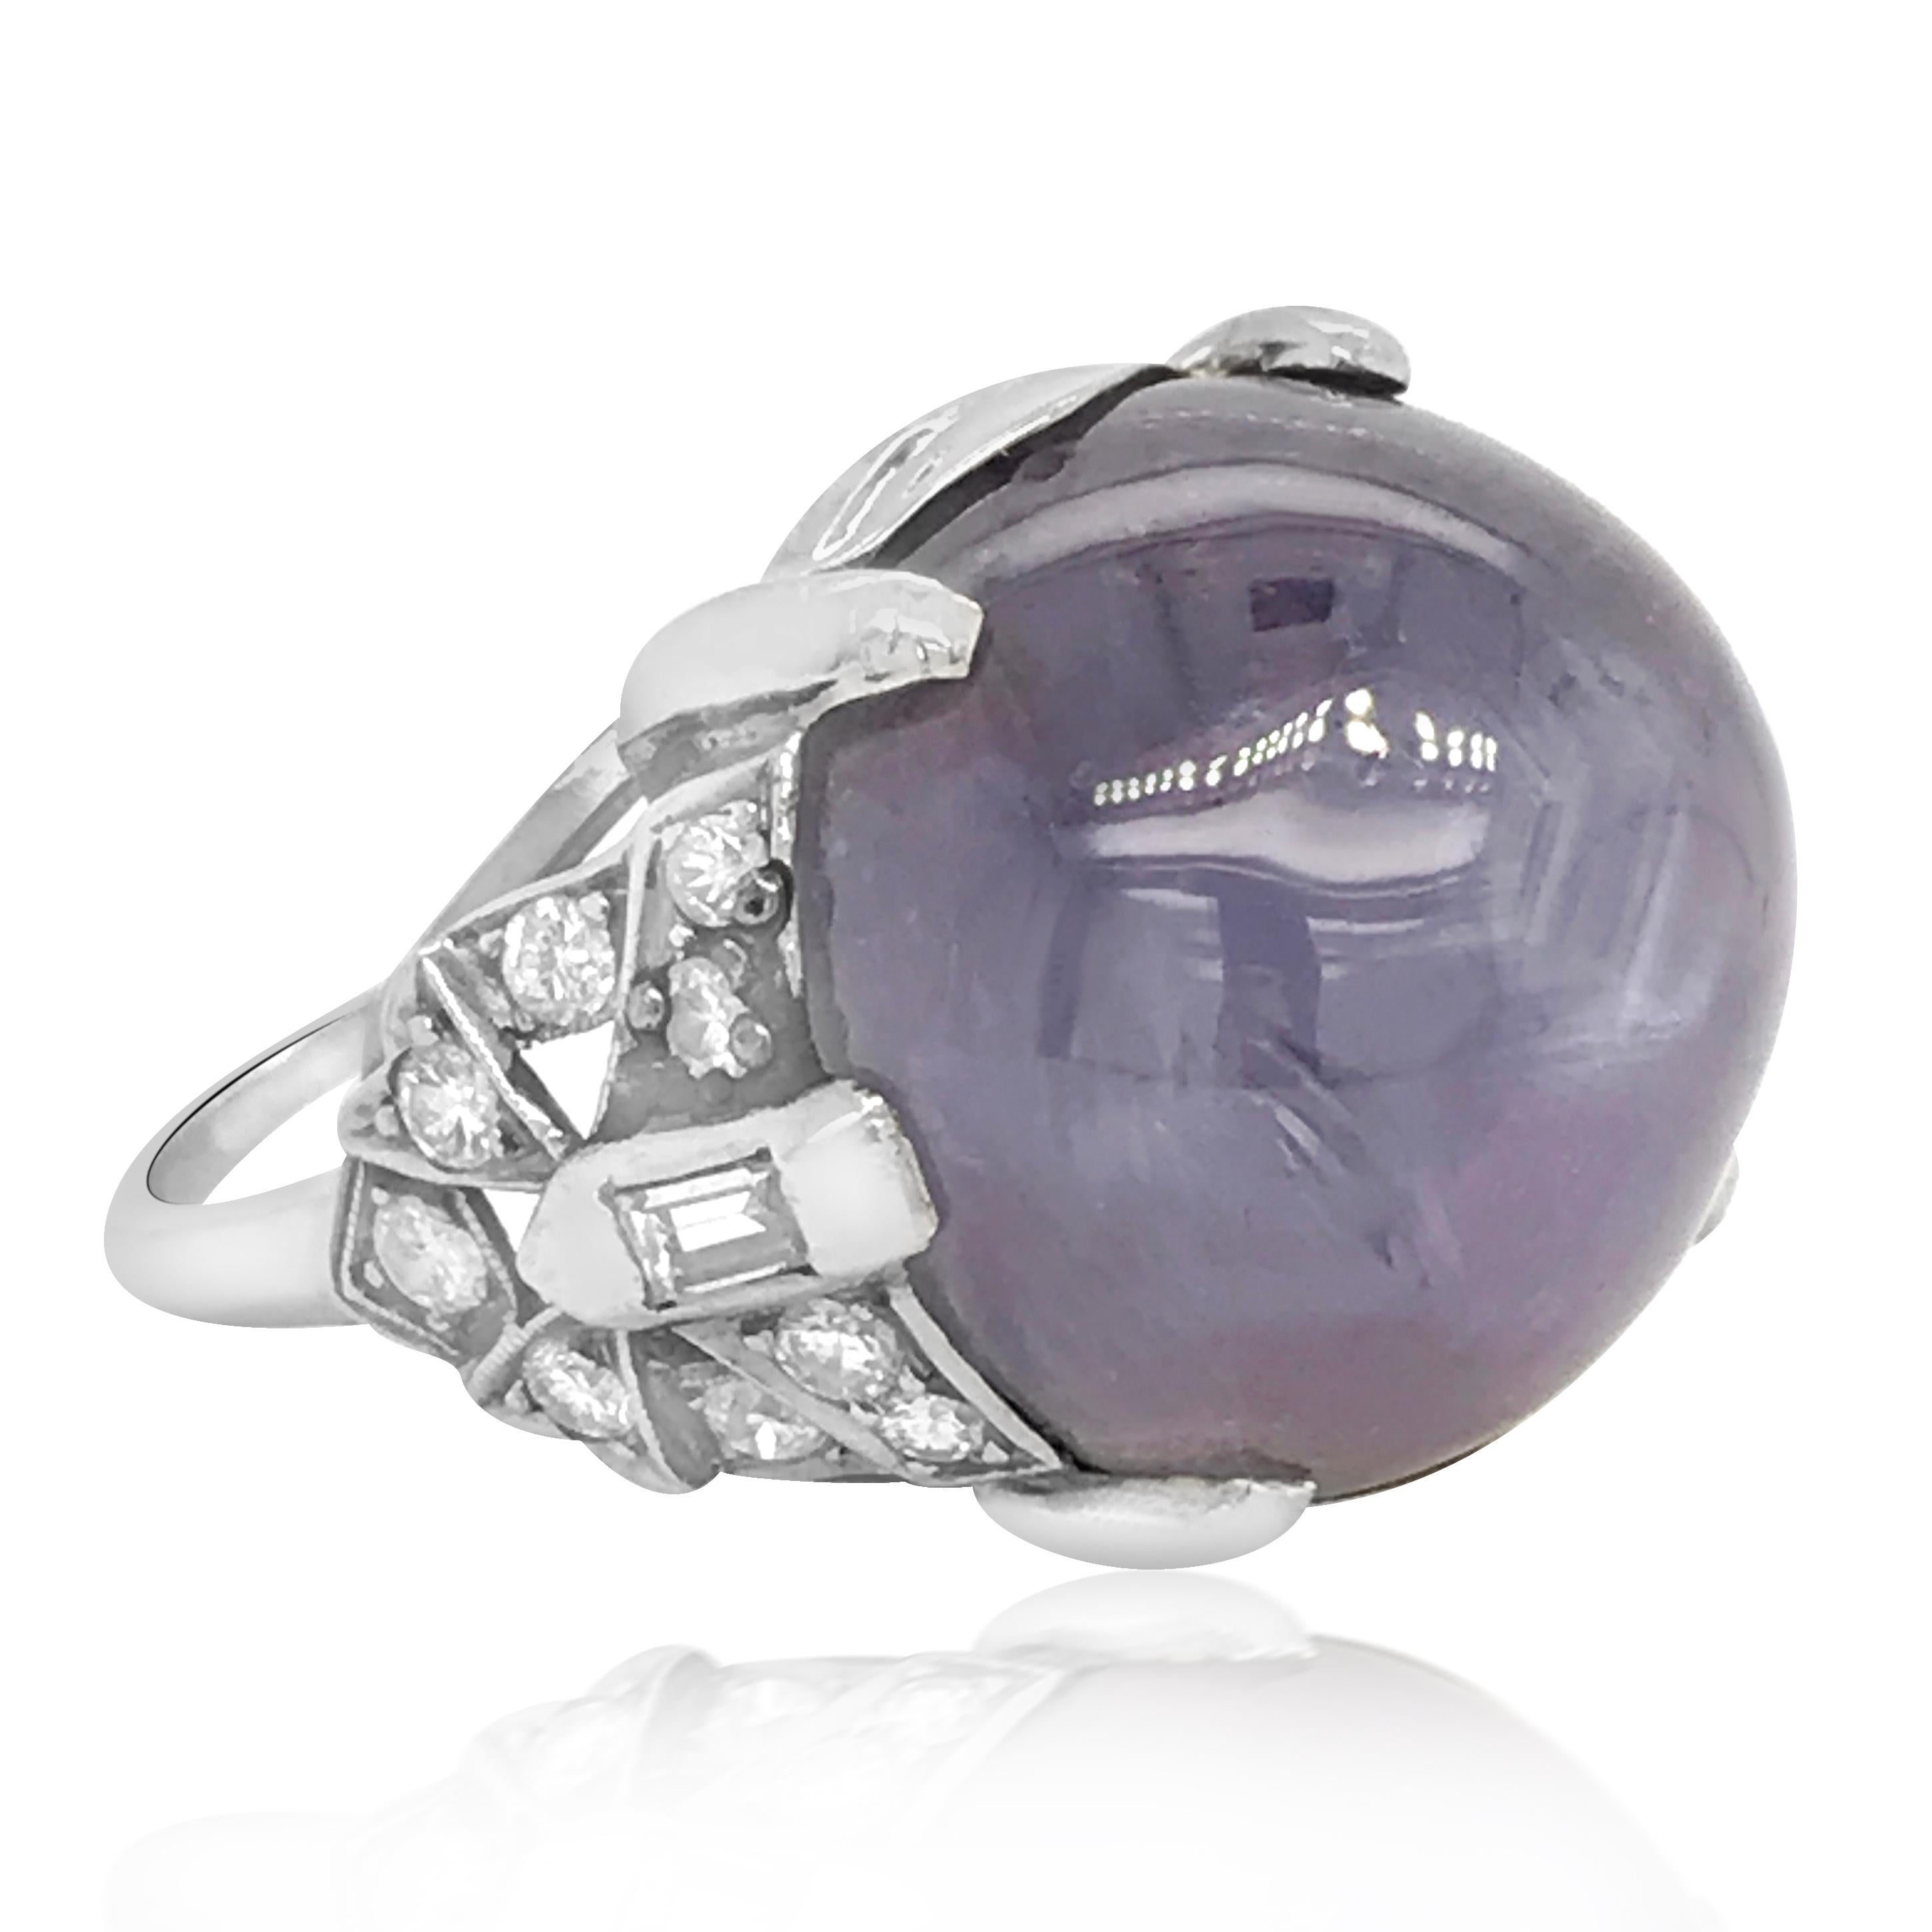 This stunning antique art deco star sapphire and diamond ring is crafted in solid platinum, weighing 12.8 grams and measuring 20mm wide and 13mm high. Exposing a one prominent prong-set, round star sapphire weighing approx. 32.00carats. Surrounded